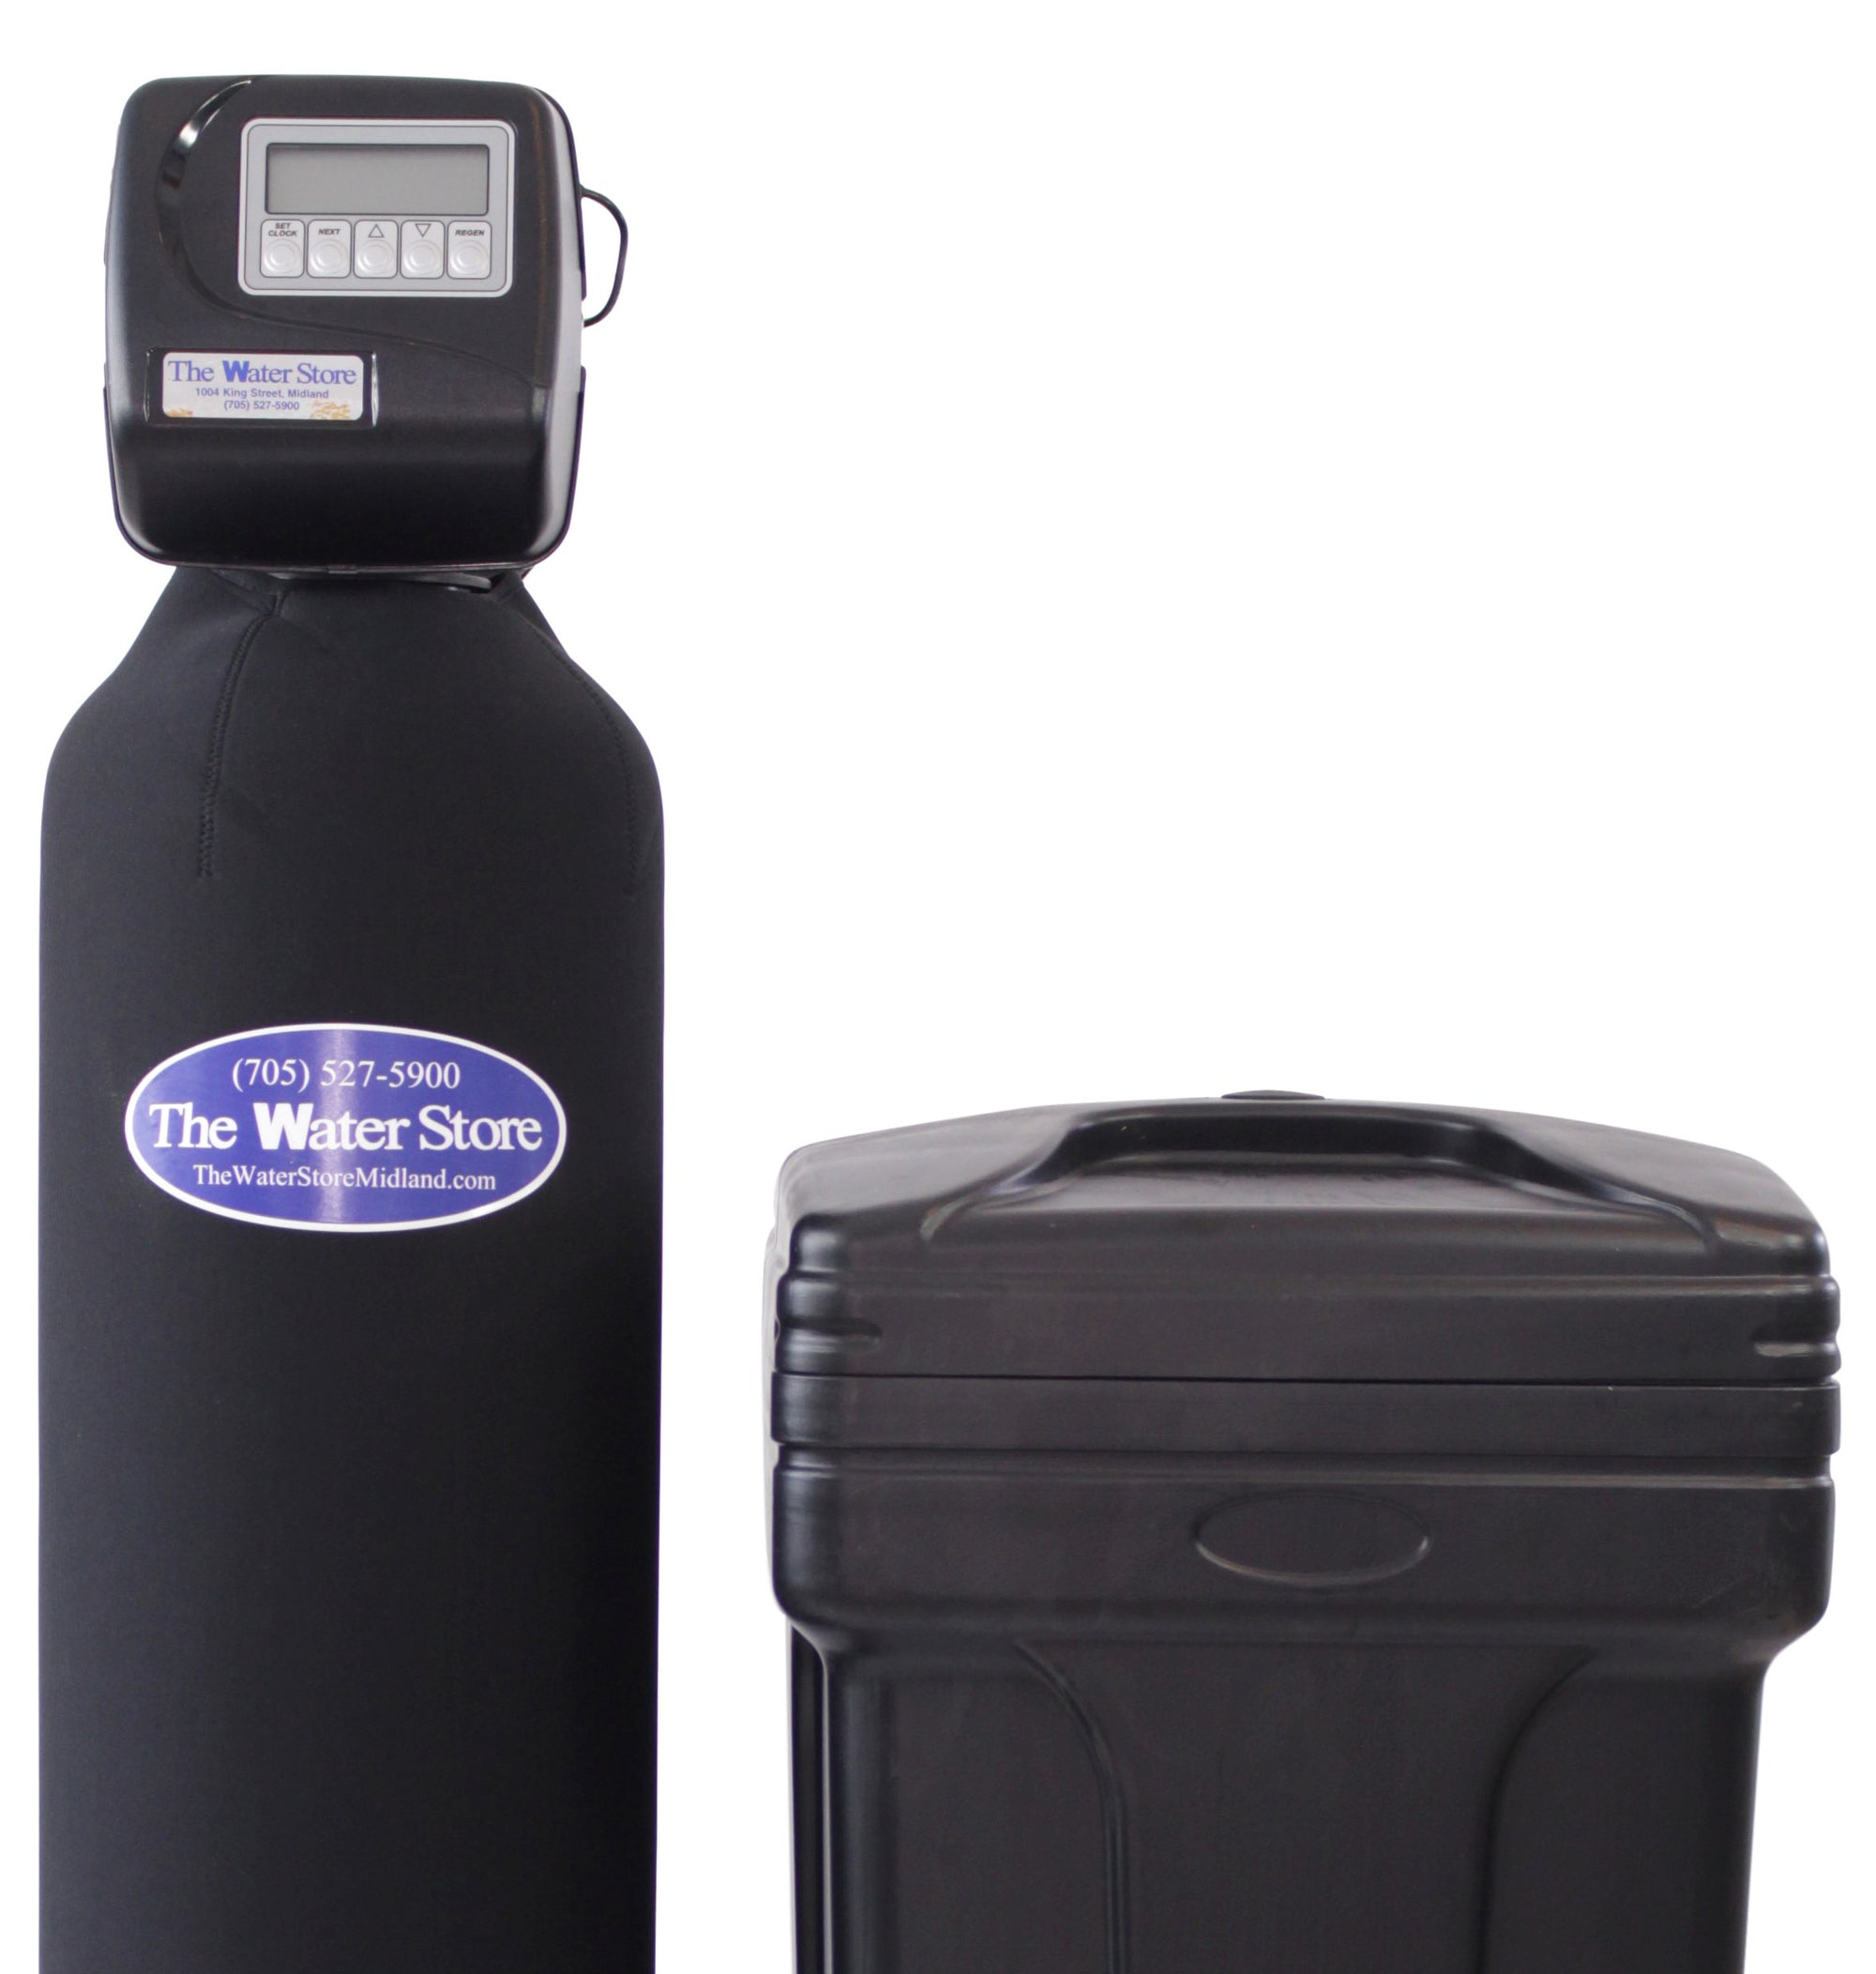 What Size Water Softener Do I Need for My Family?